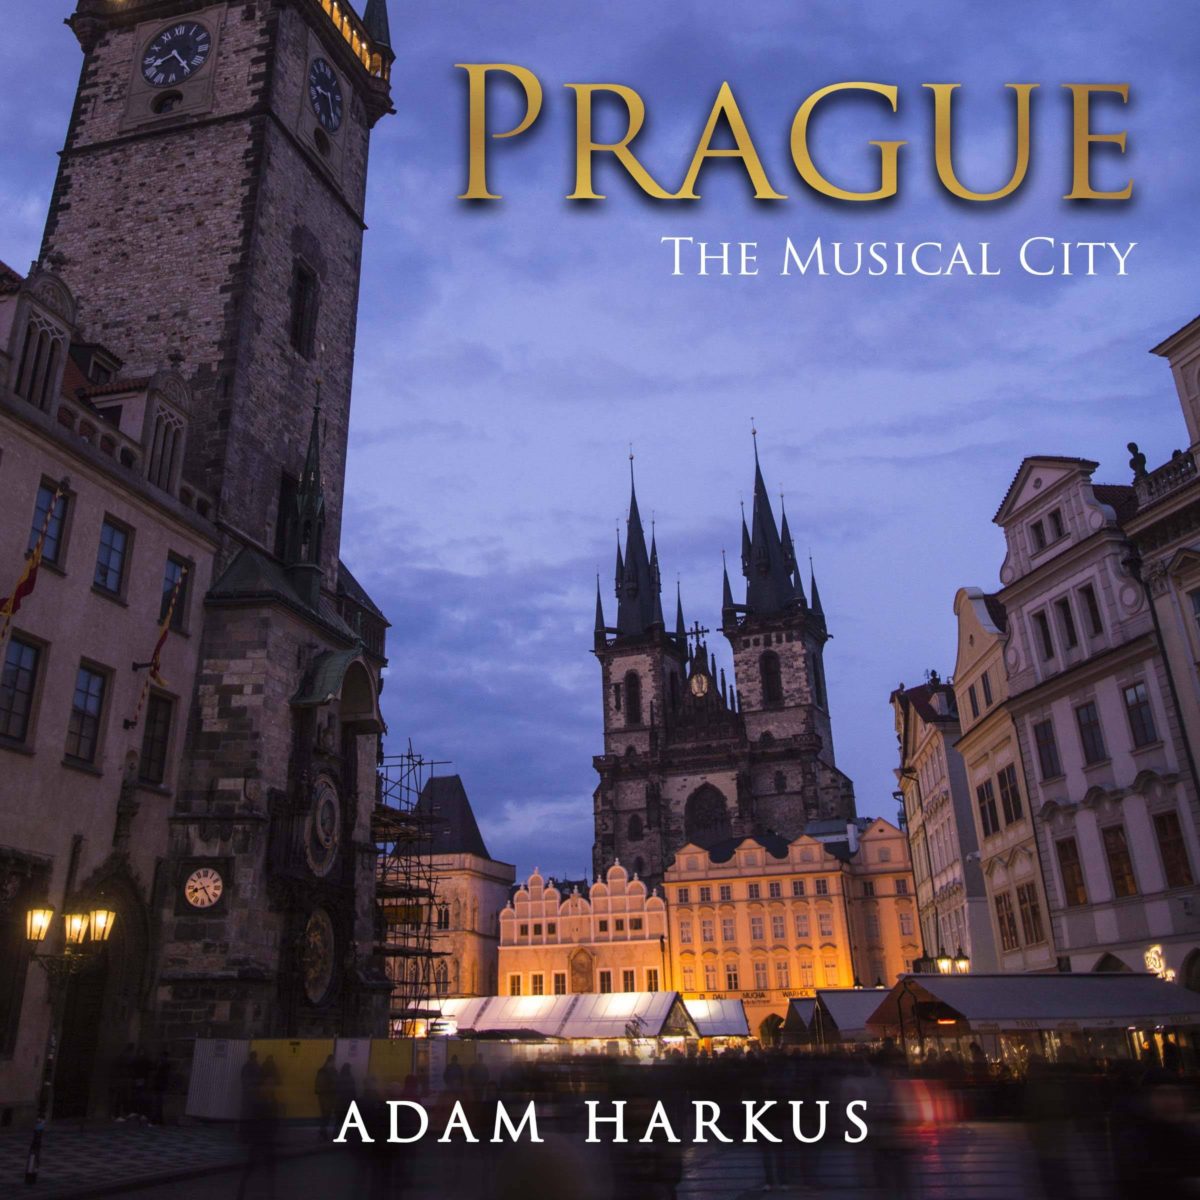 Prague: The Musical City. Special offer Ends this Friday!!